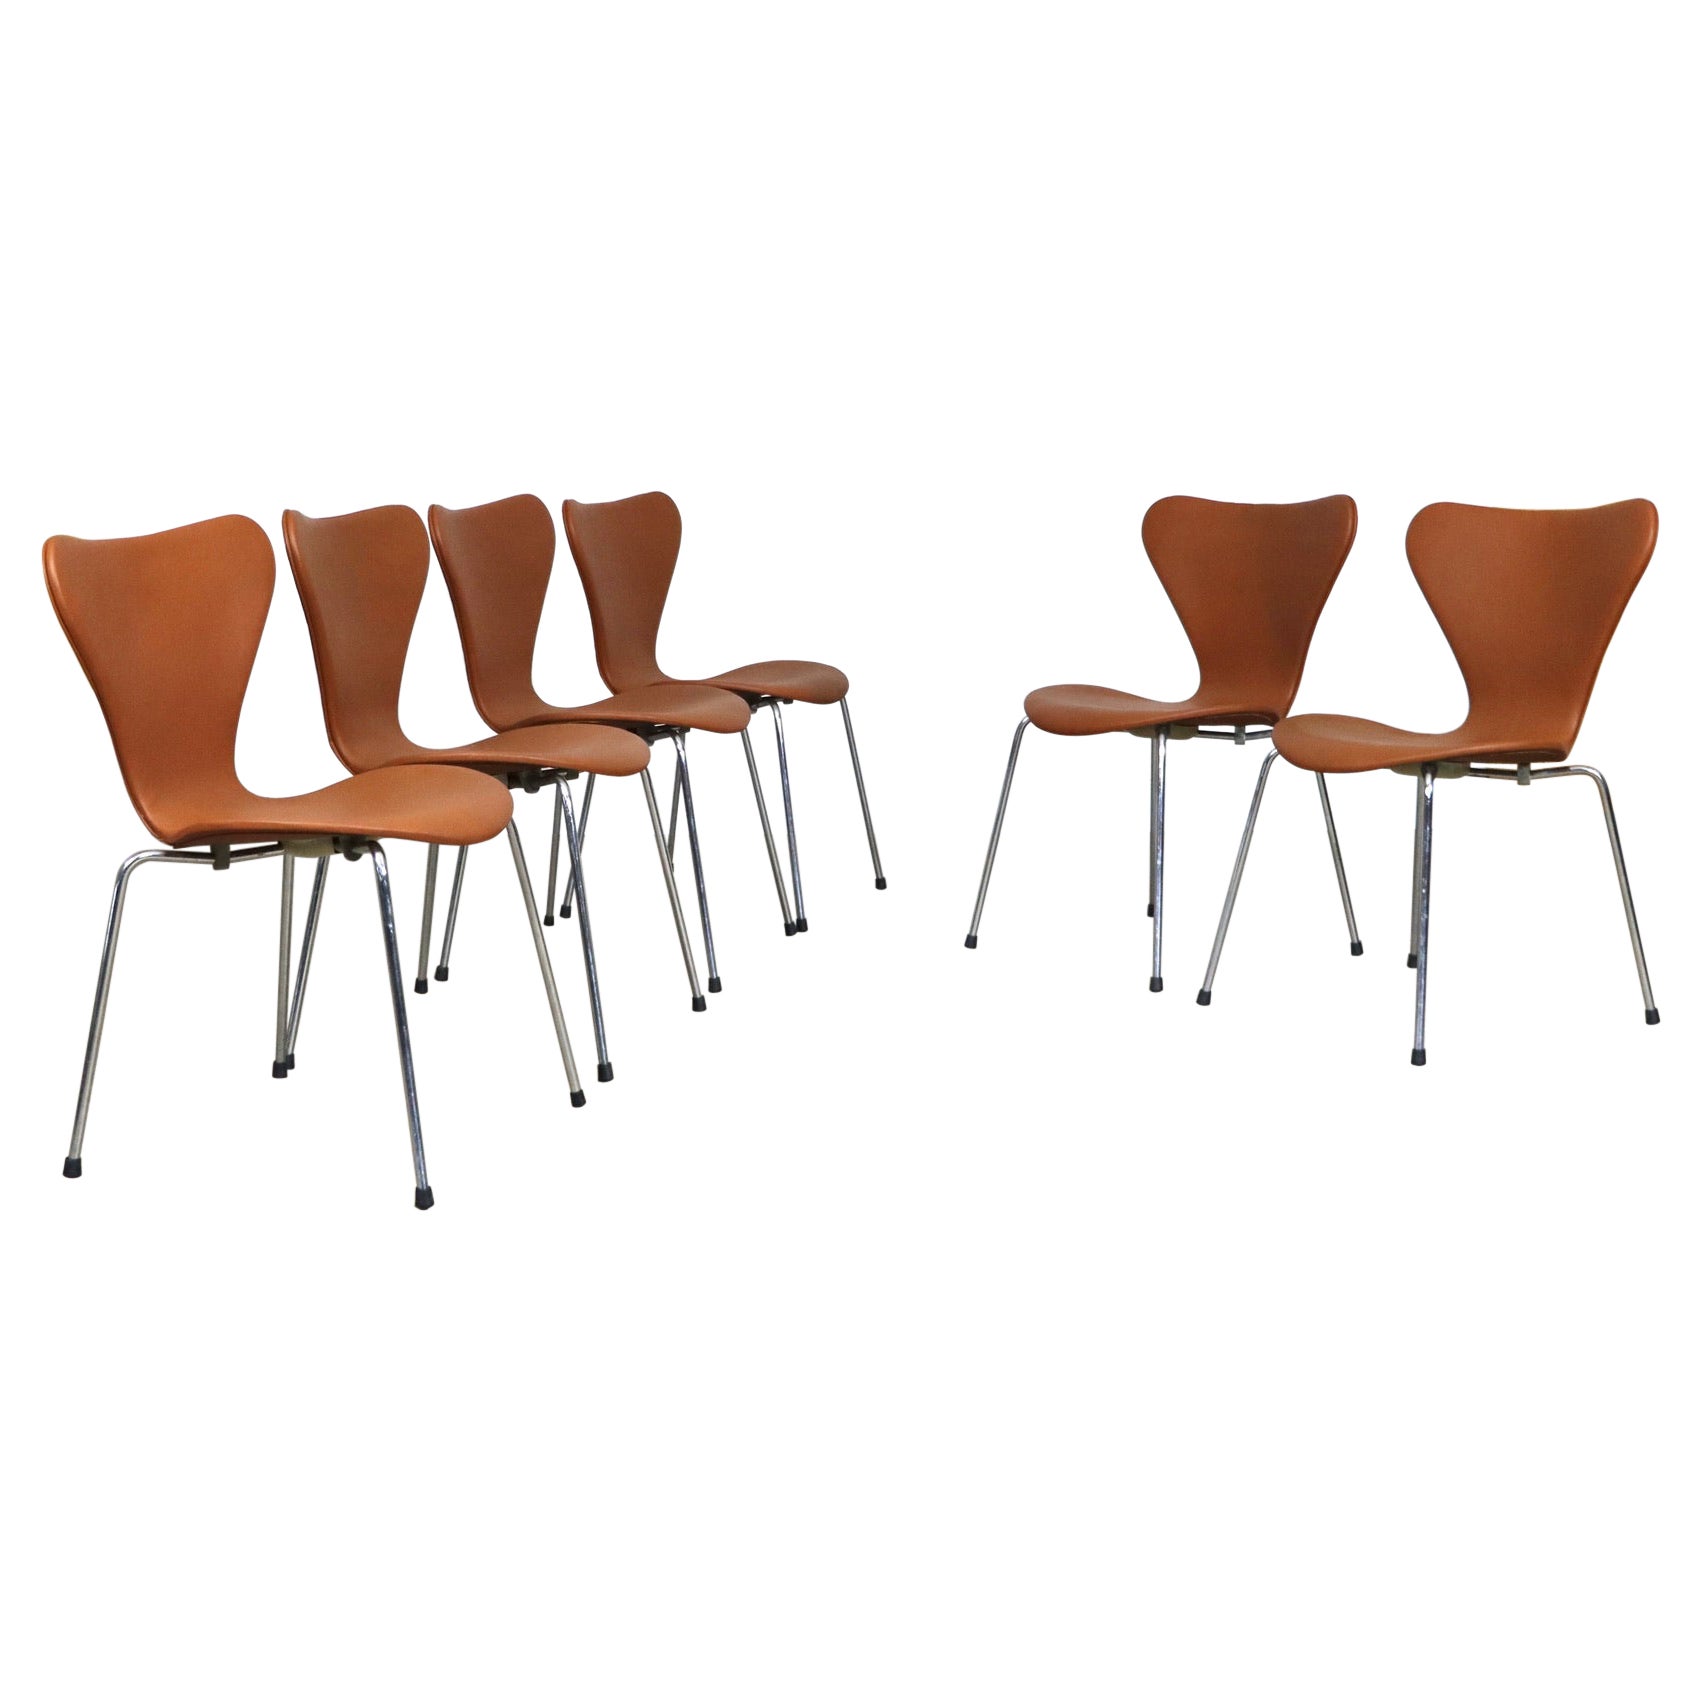 Set of 6 Butterfly Chairs in Cognac Leather by Arne Jacobsen for Fritz Hansen